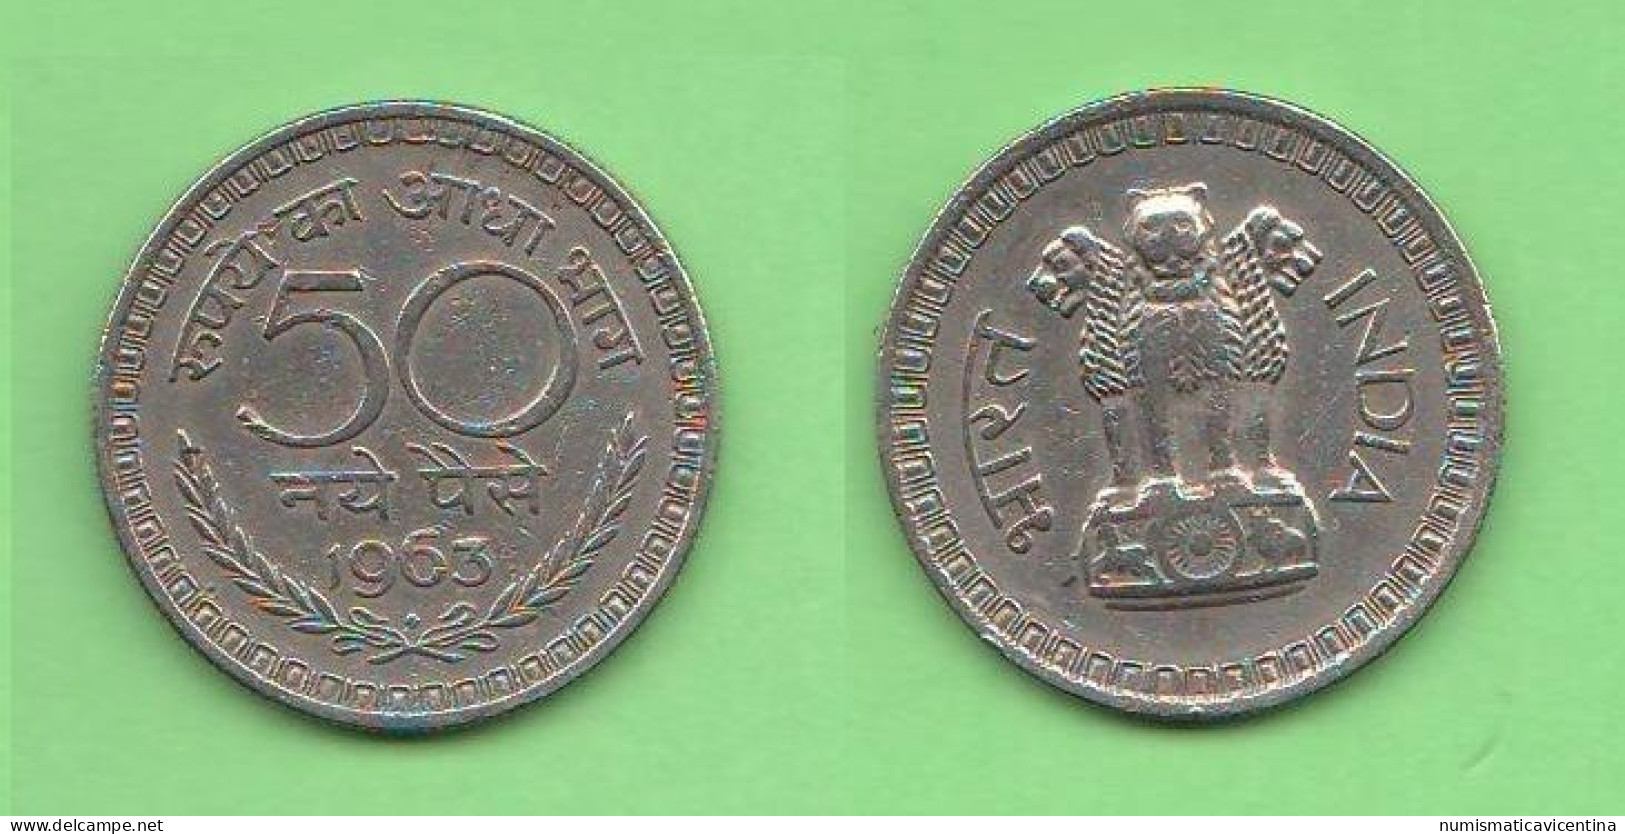 India 50 Paise 1963 Inde Nickel Coin - Inde